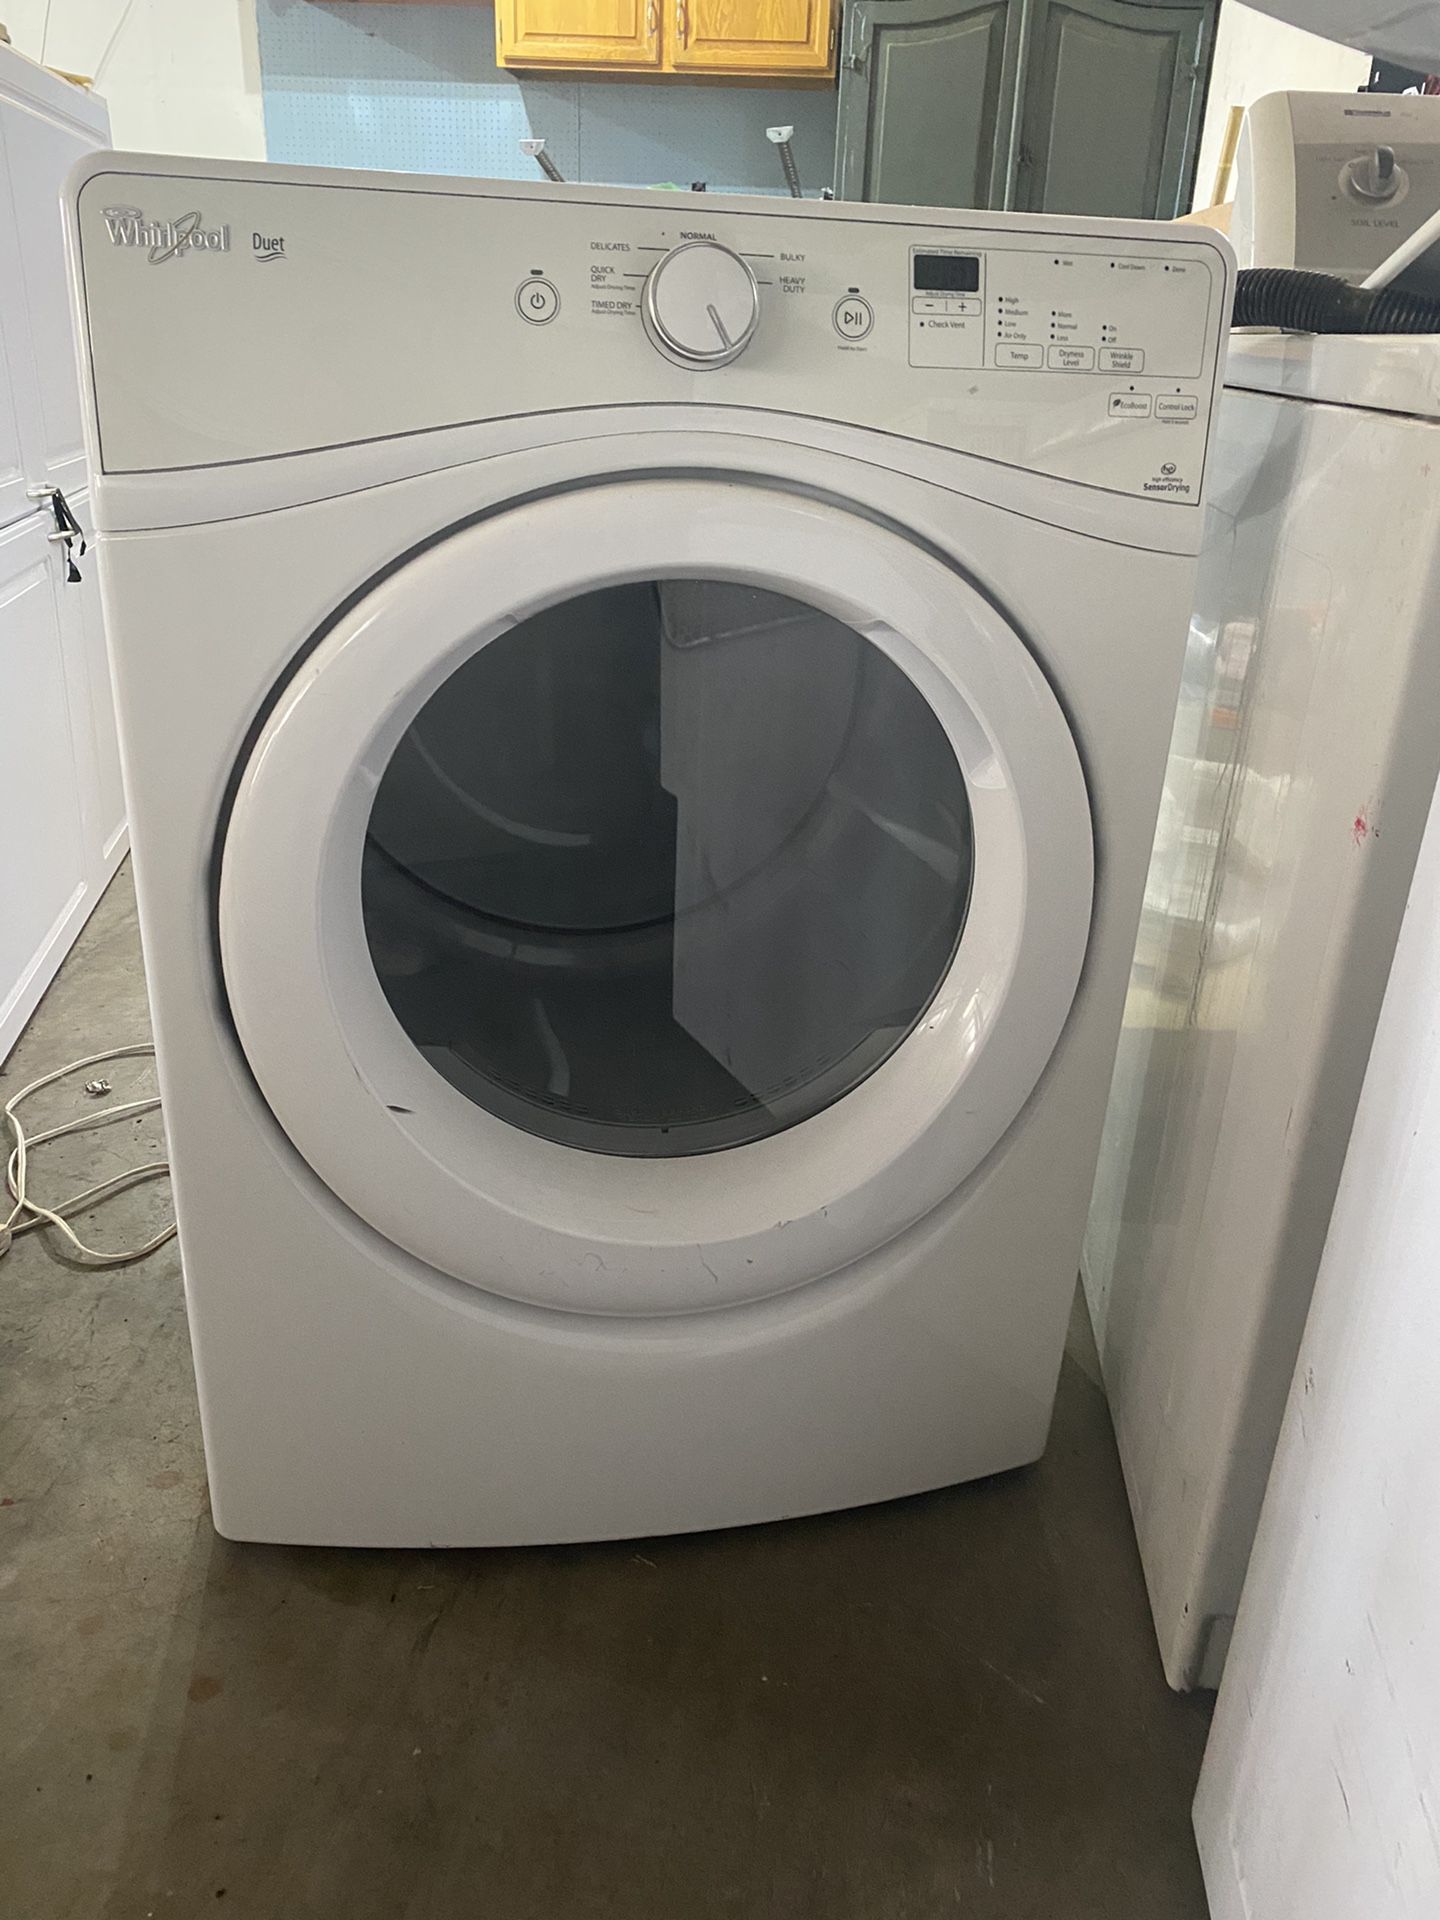 Whirlpool electrical dryer